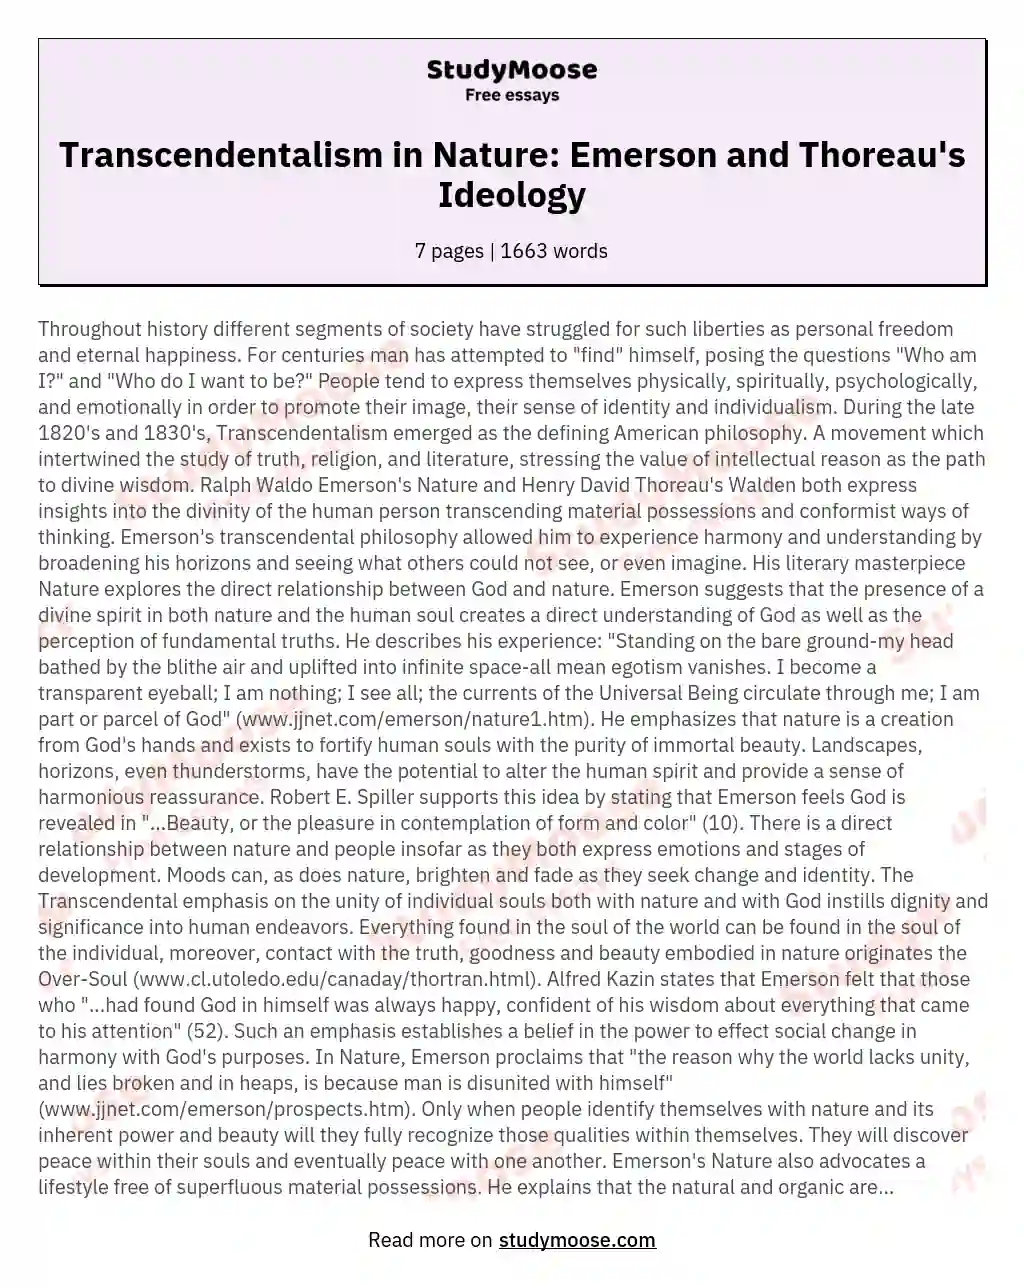 Transcendentalism in Nature: Emerson and Thoreau's Ideology essay